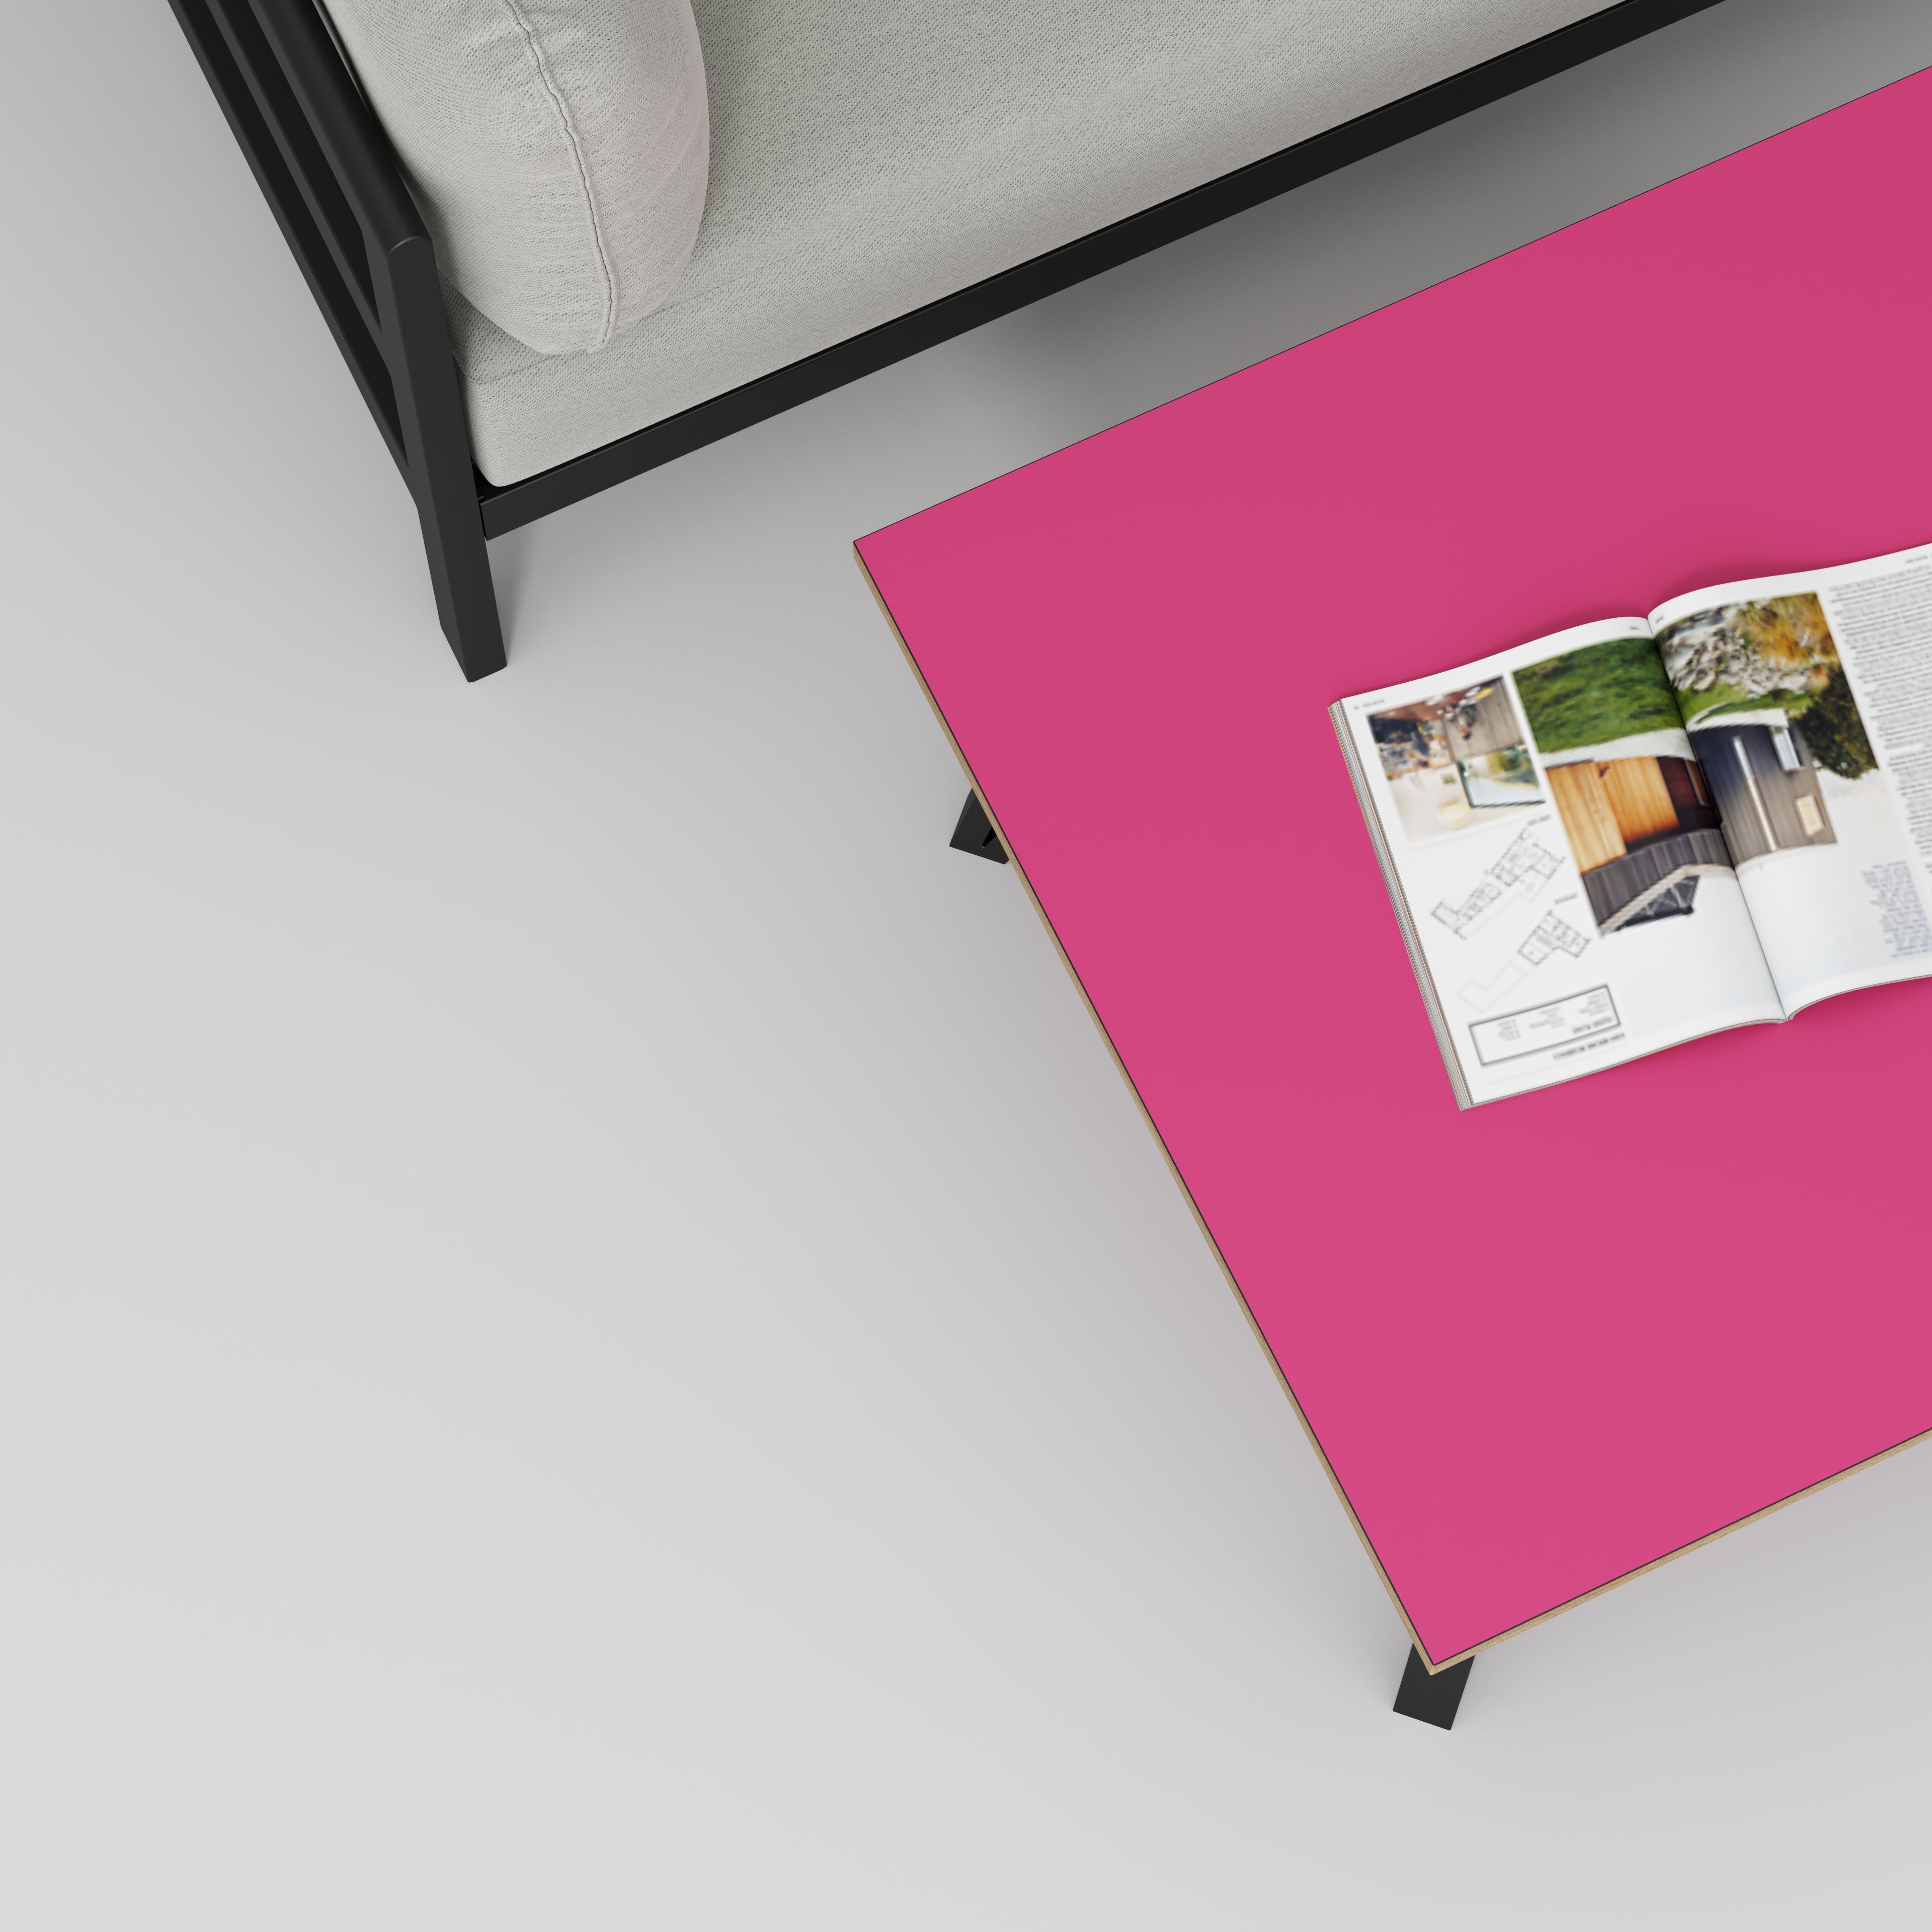 Coffee Table with Black Box Hairpin Legs - Formica Juicy Pink - 800(w) x 800(d) x 425(h)